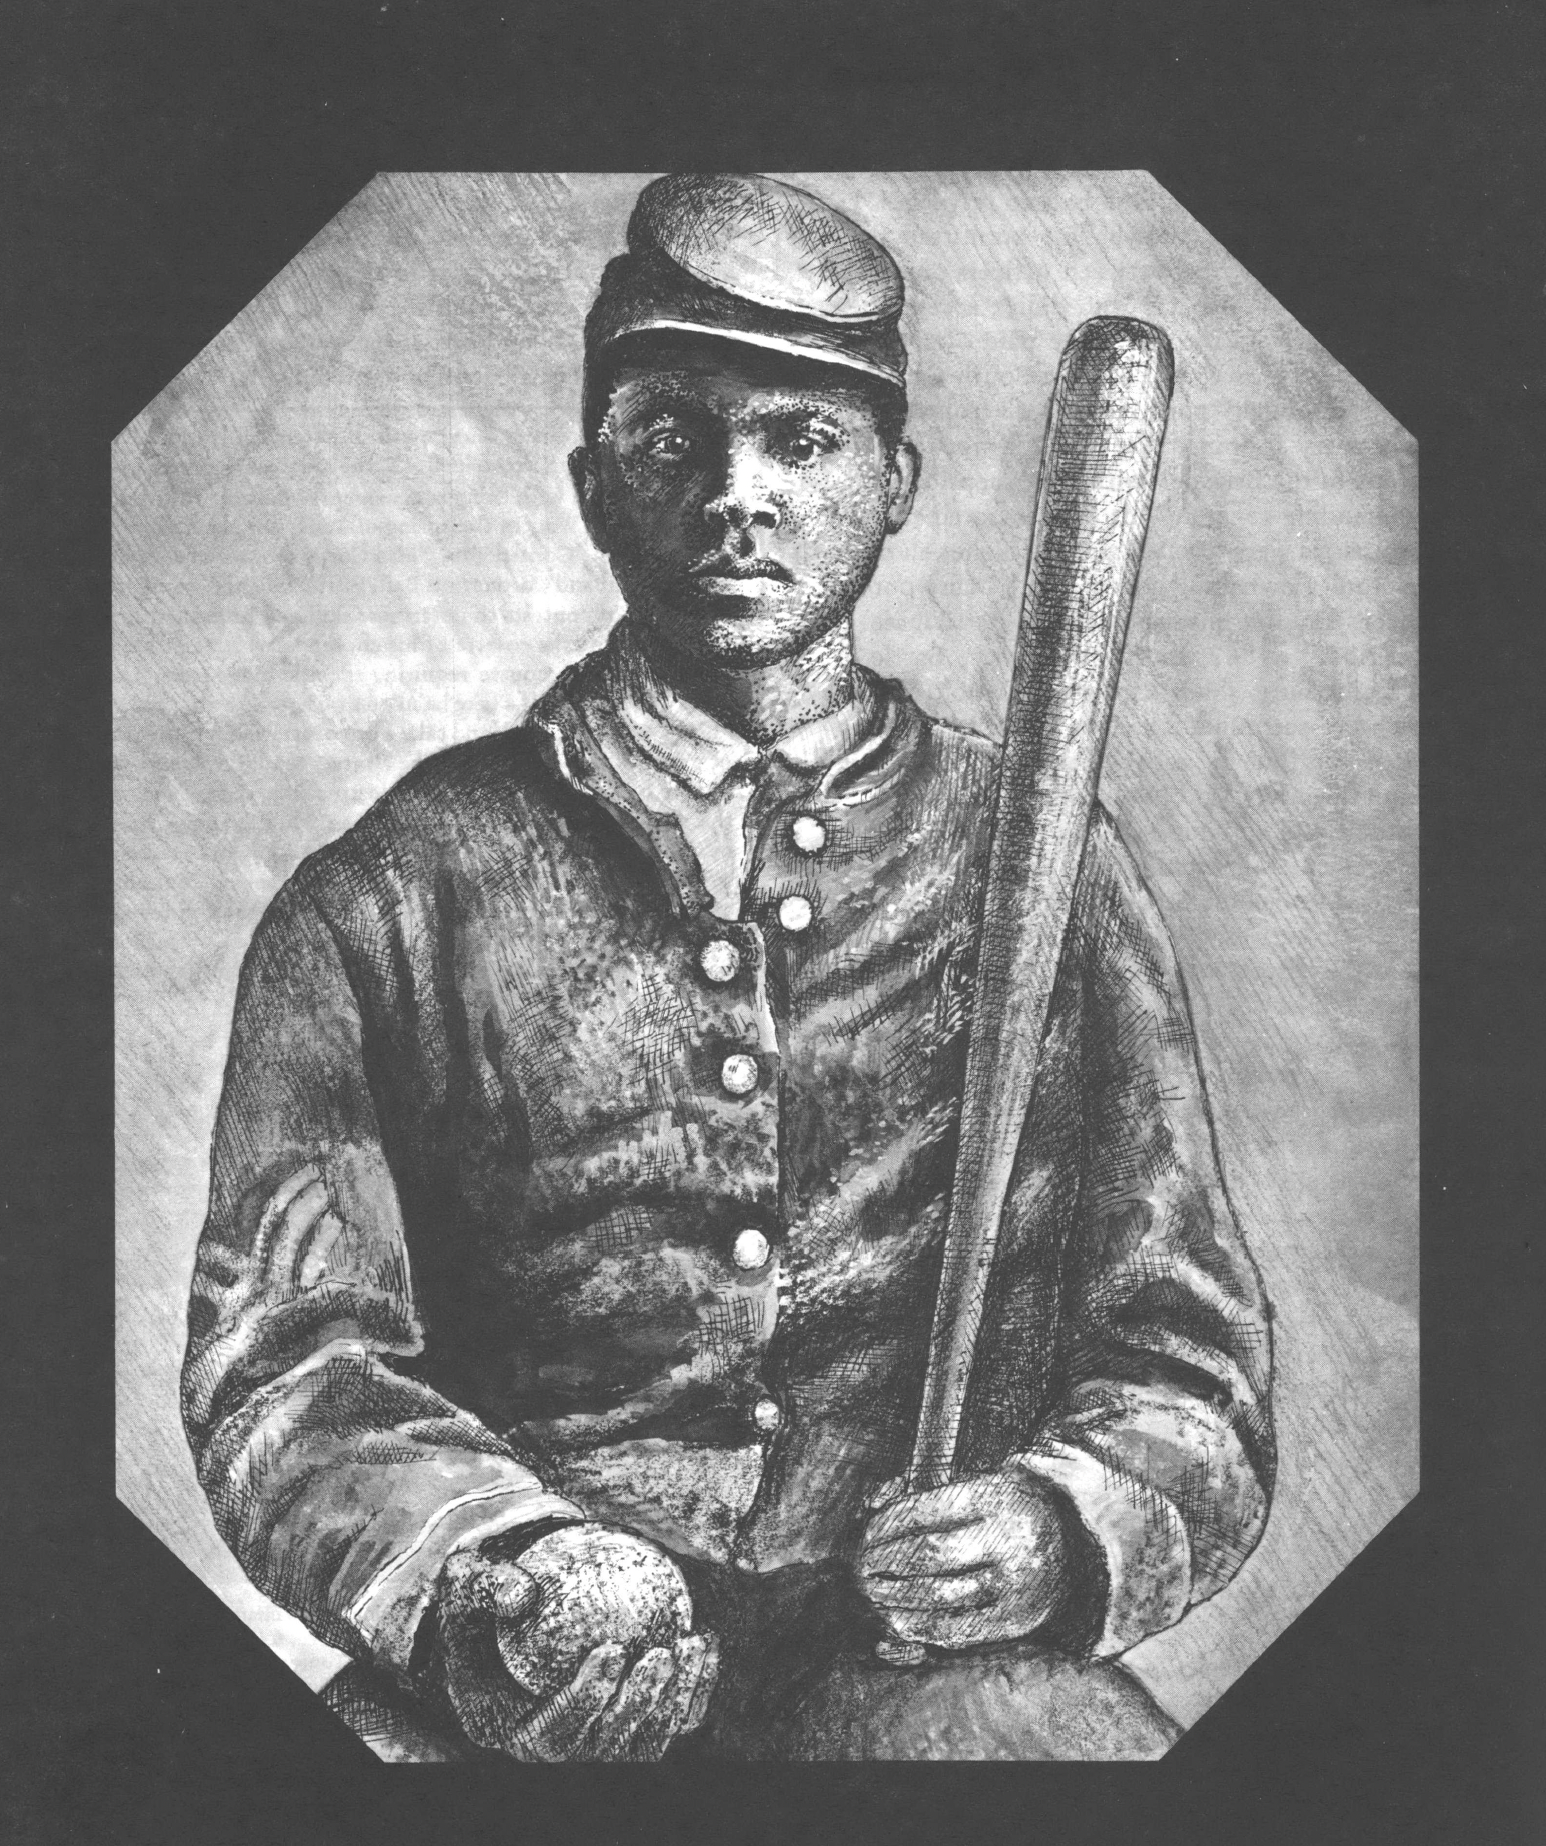 Black and white portrait drawing of Black man wearing uniform and cap, holding a baseball bat